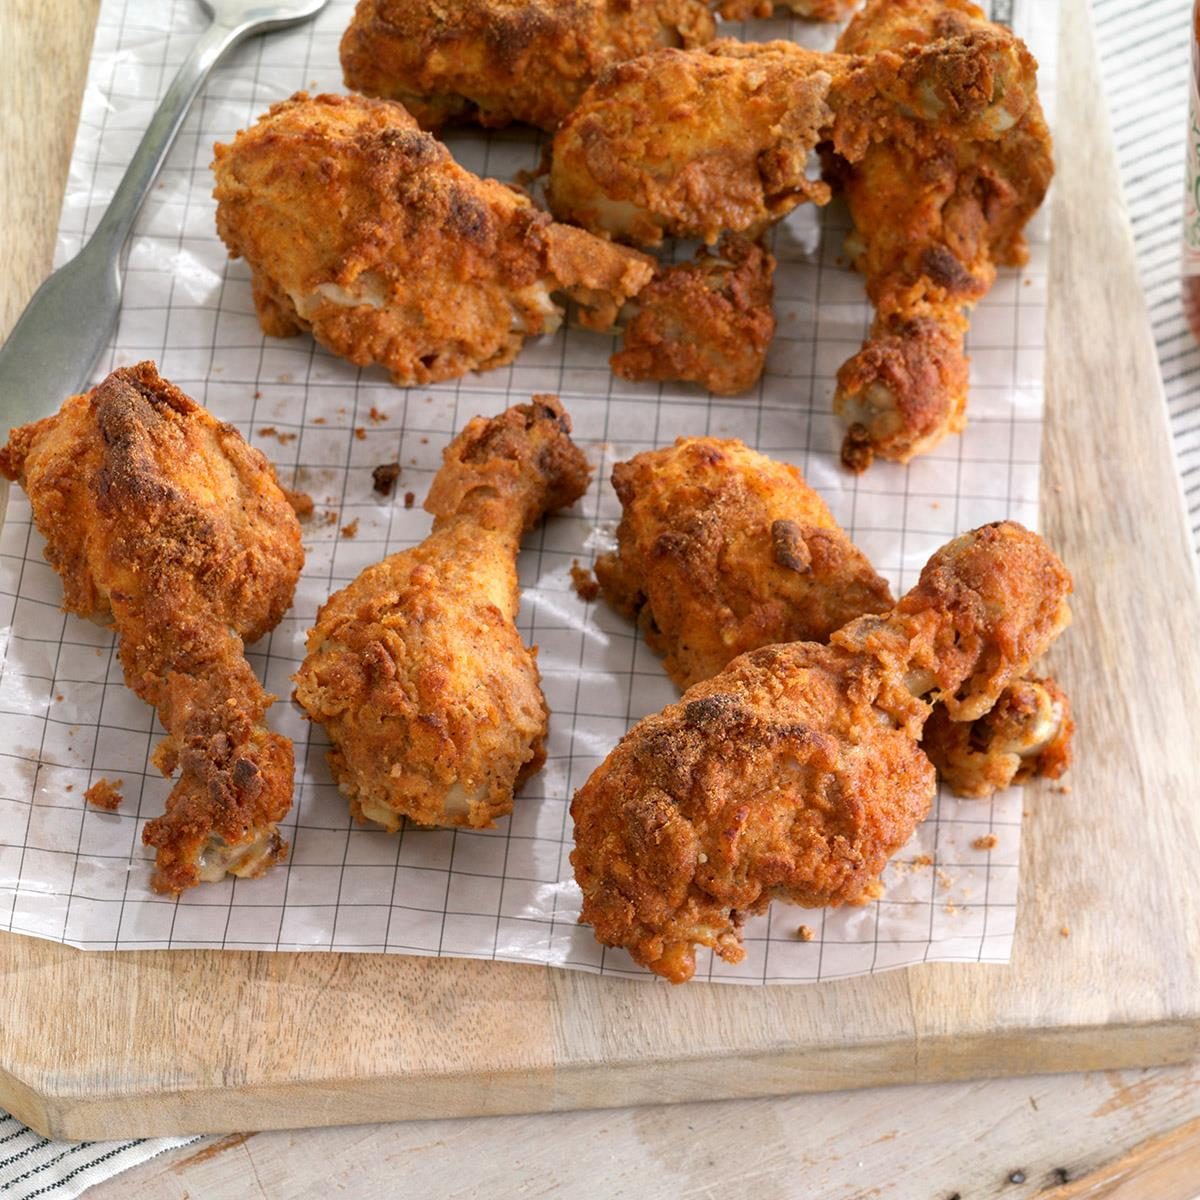 Healthy Baked Chicken Recipes | Reader's Digest Canada